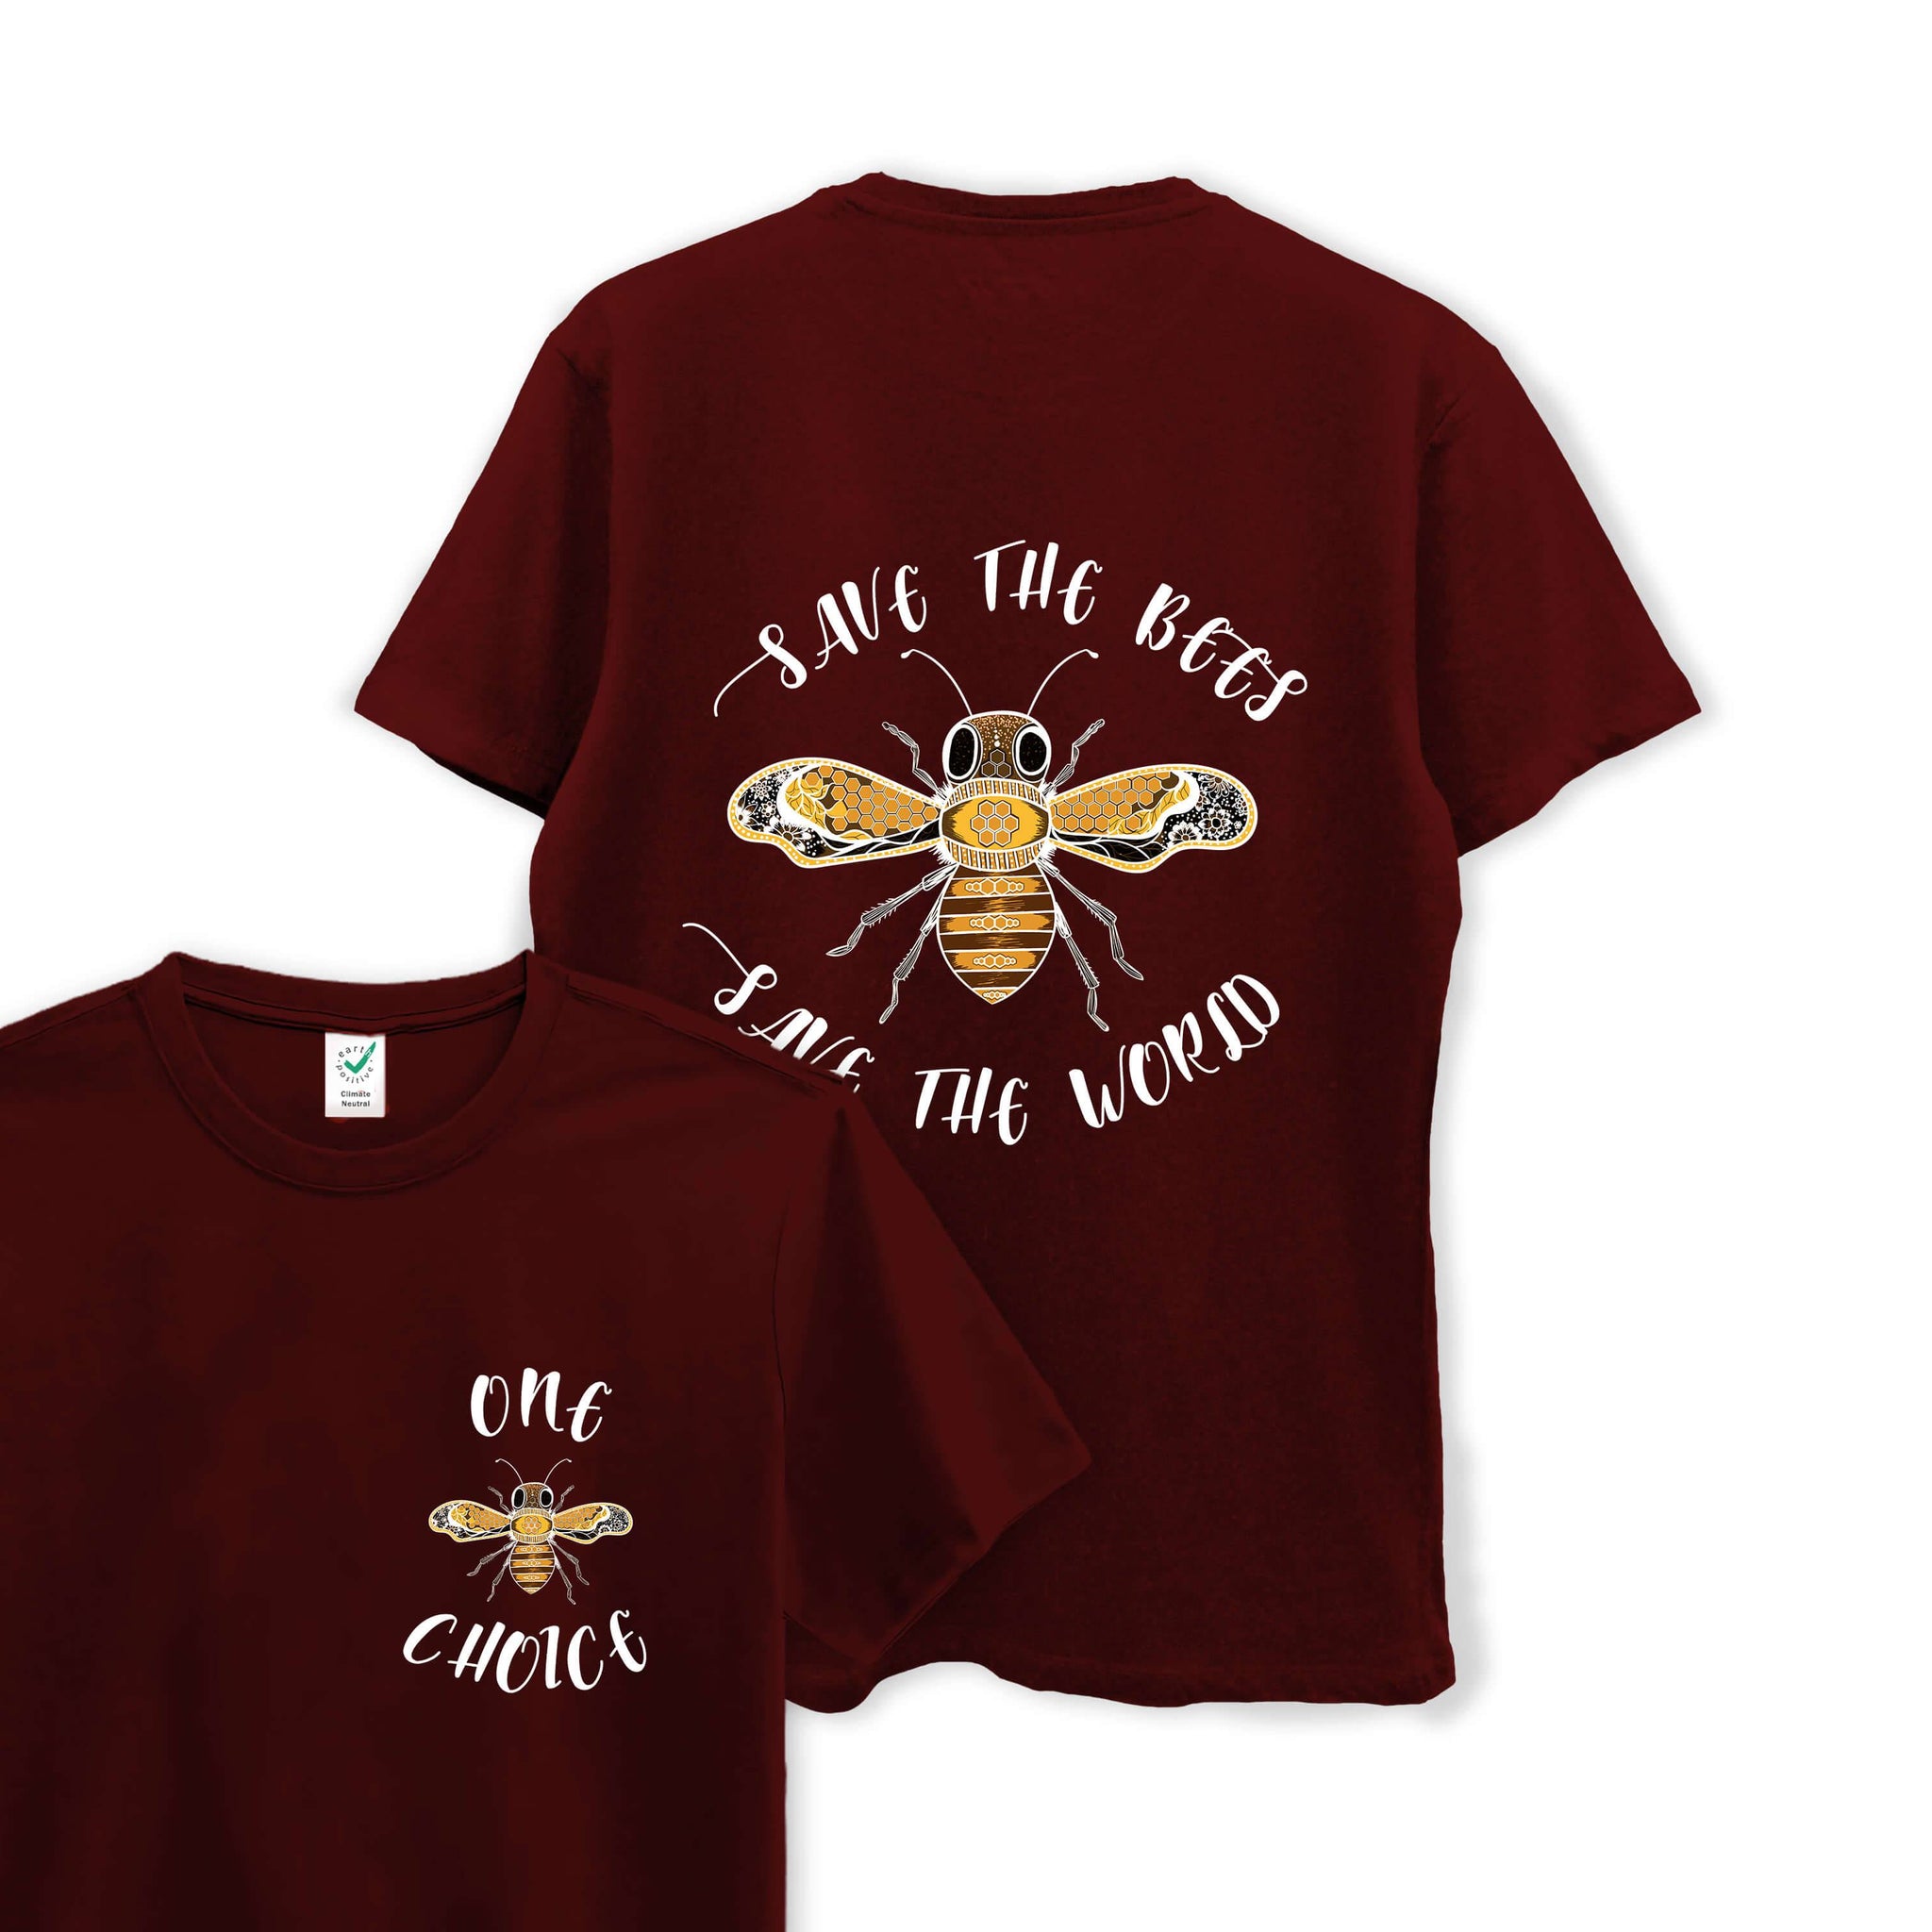 Save The Bees, Save The World- Organic Cotton Tee - One Choice Apparel